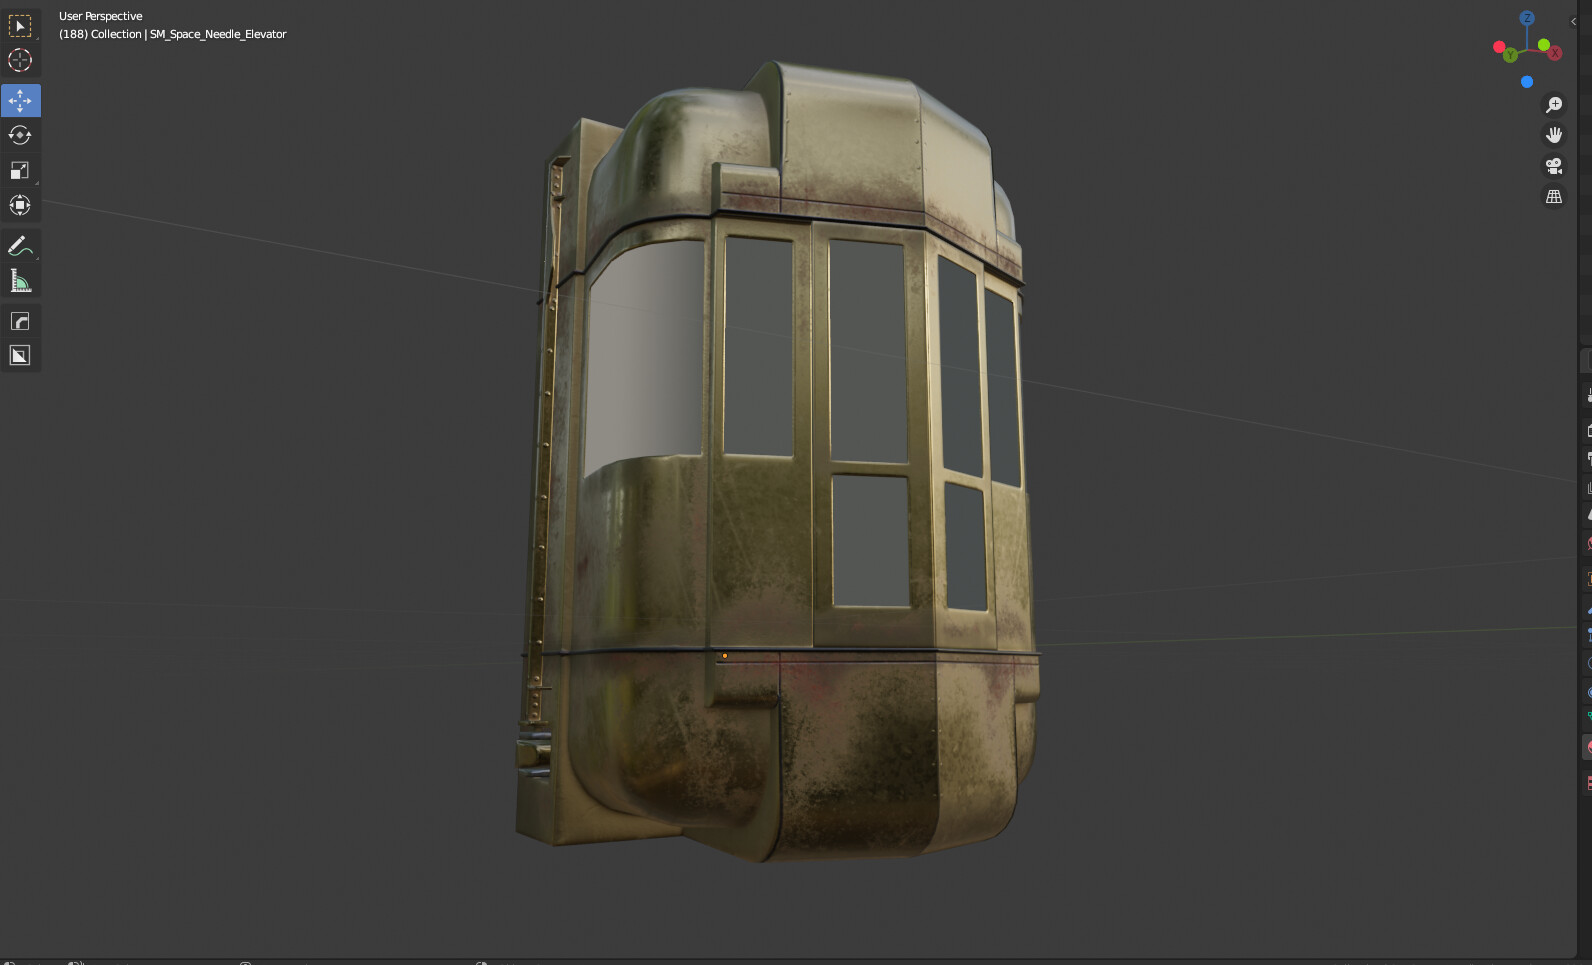 First version of textures, was more realistic in terms of the pictures, but did not fit the Fallout 4 texture style.